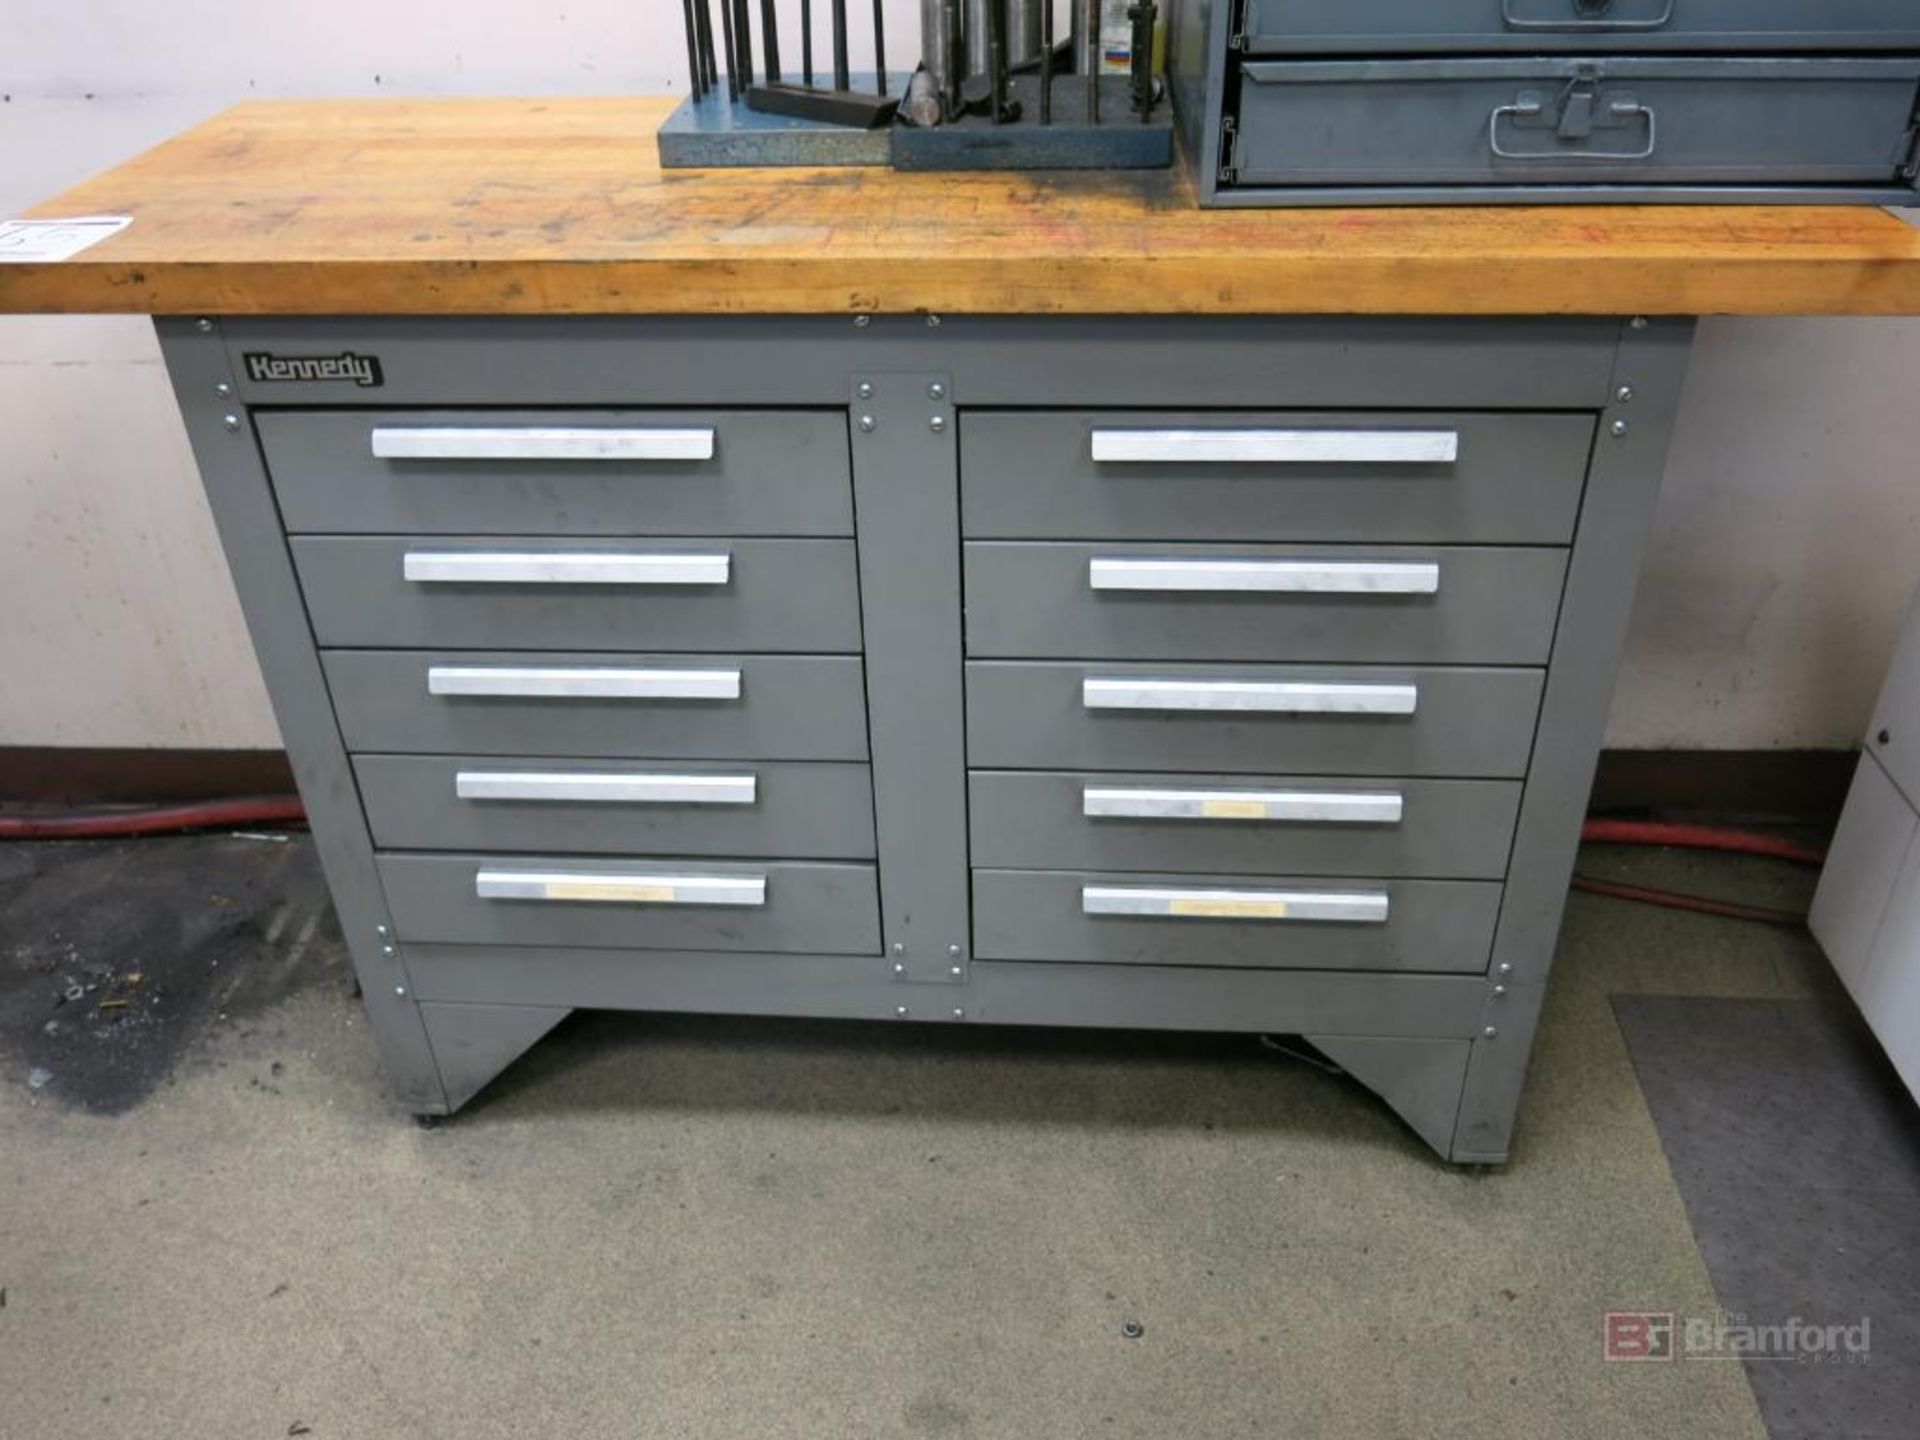 Kennedy 10-Drawer Butcher Block Top Work Bench w/ 4-Drawer Small Parts Bin - Image 4 of 4